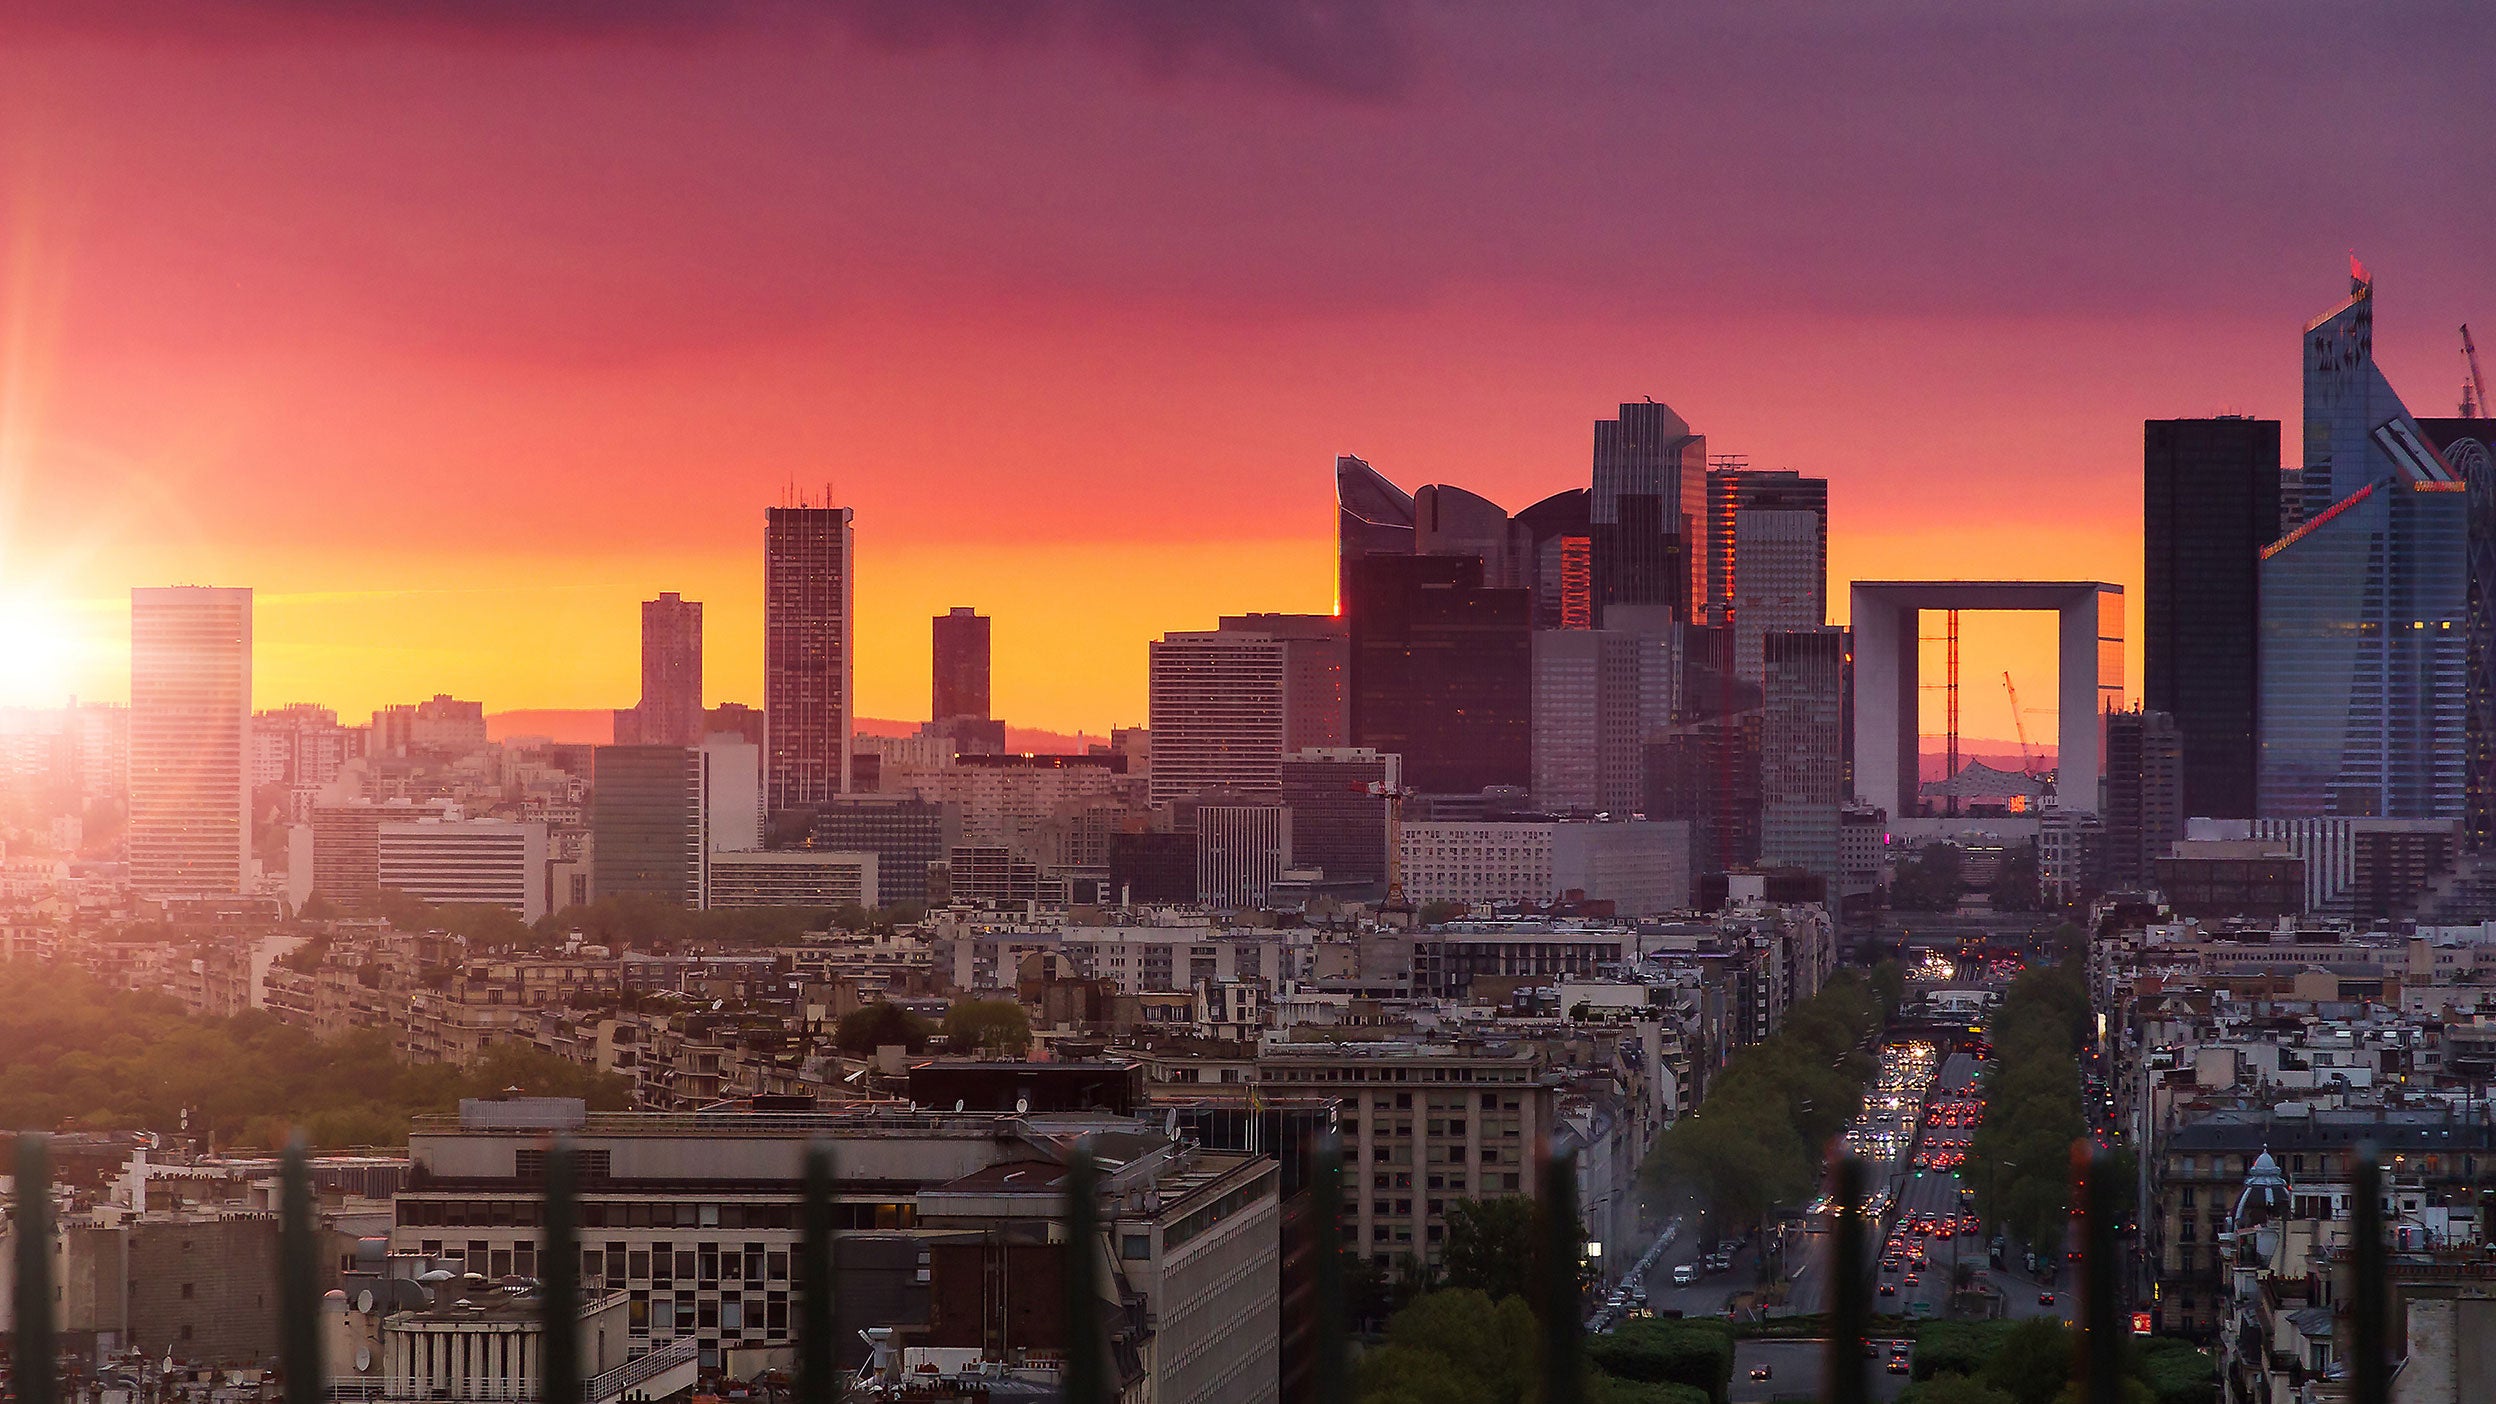 Overview of Paris skyline at sunset